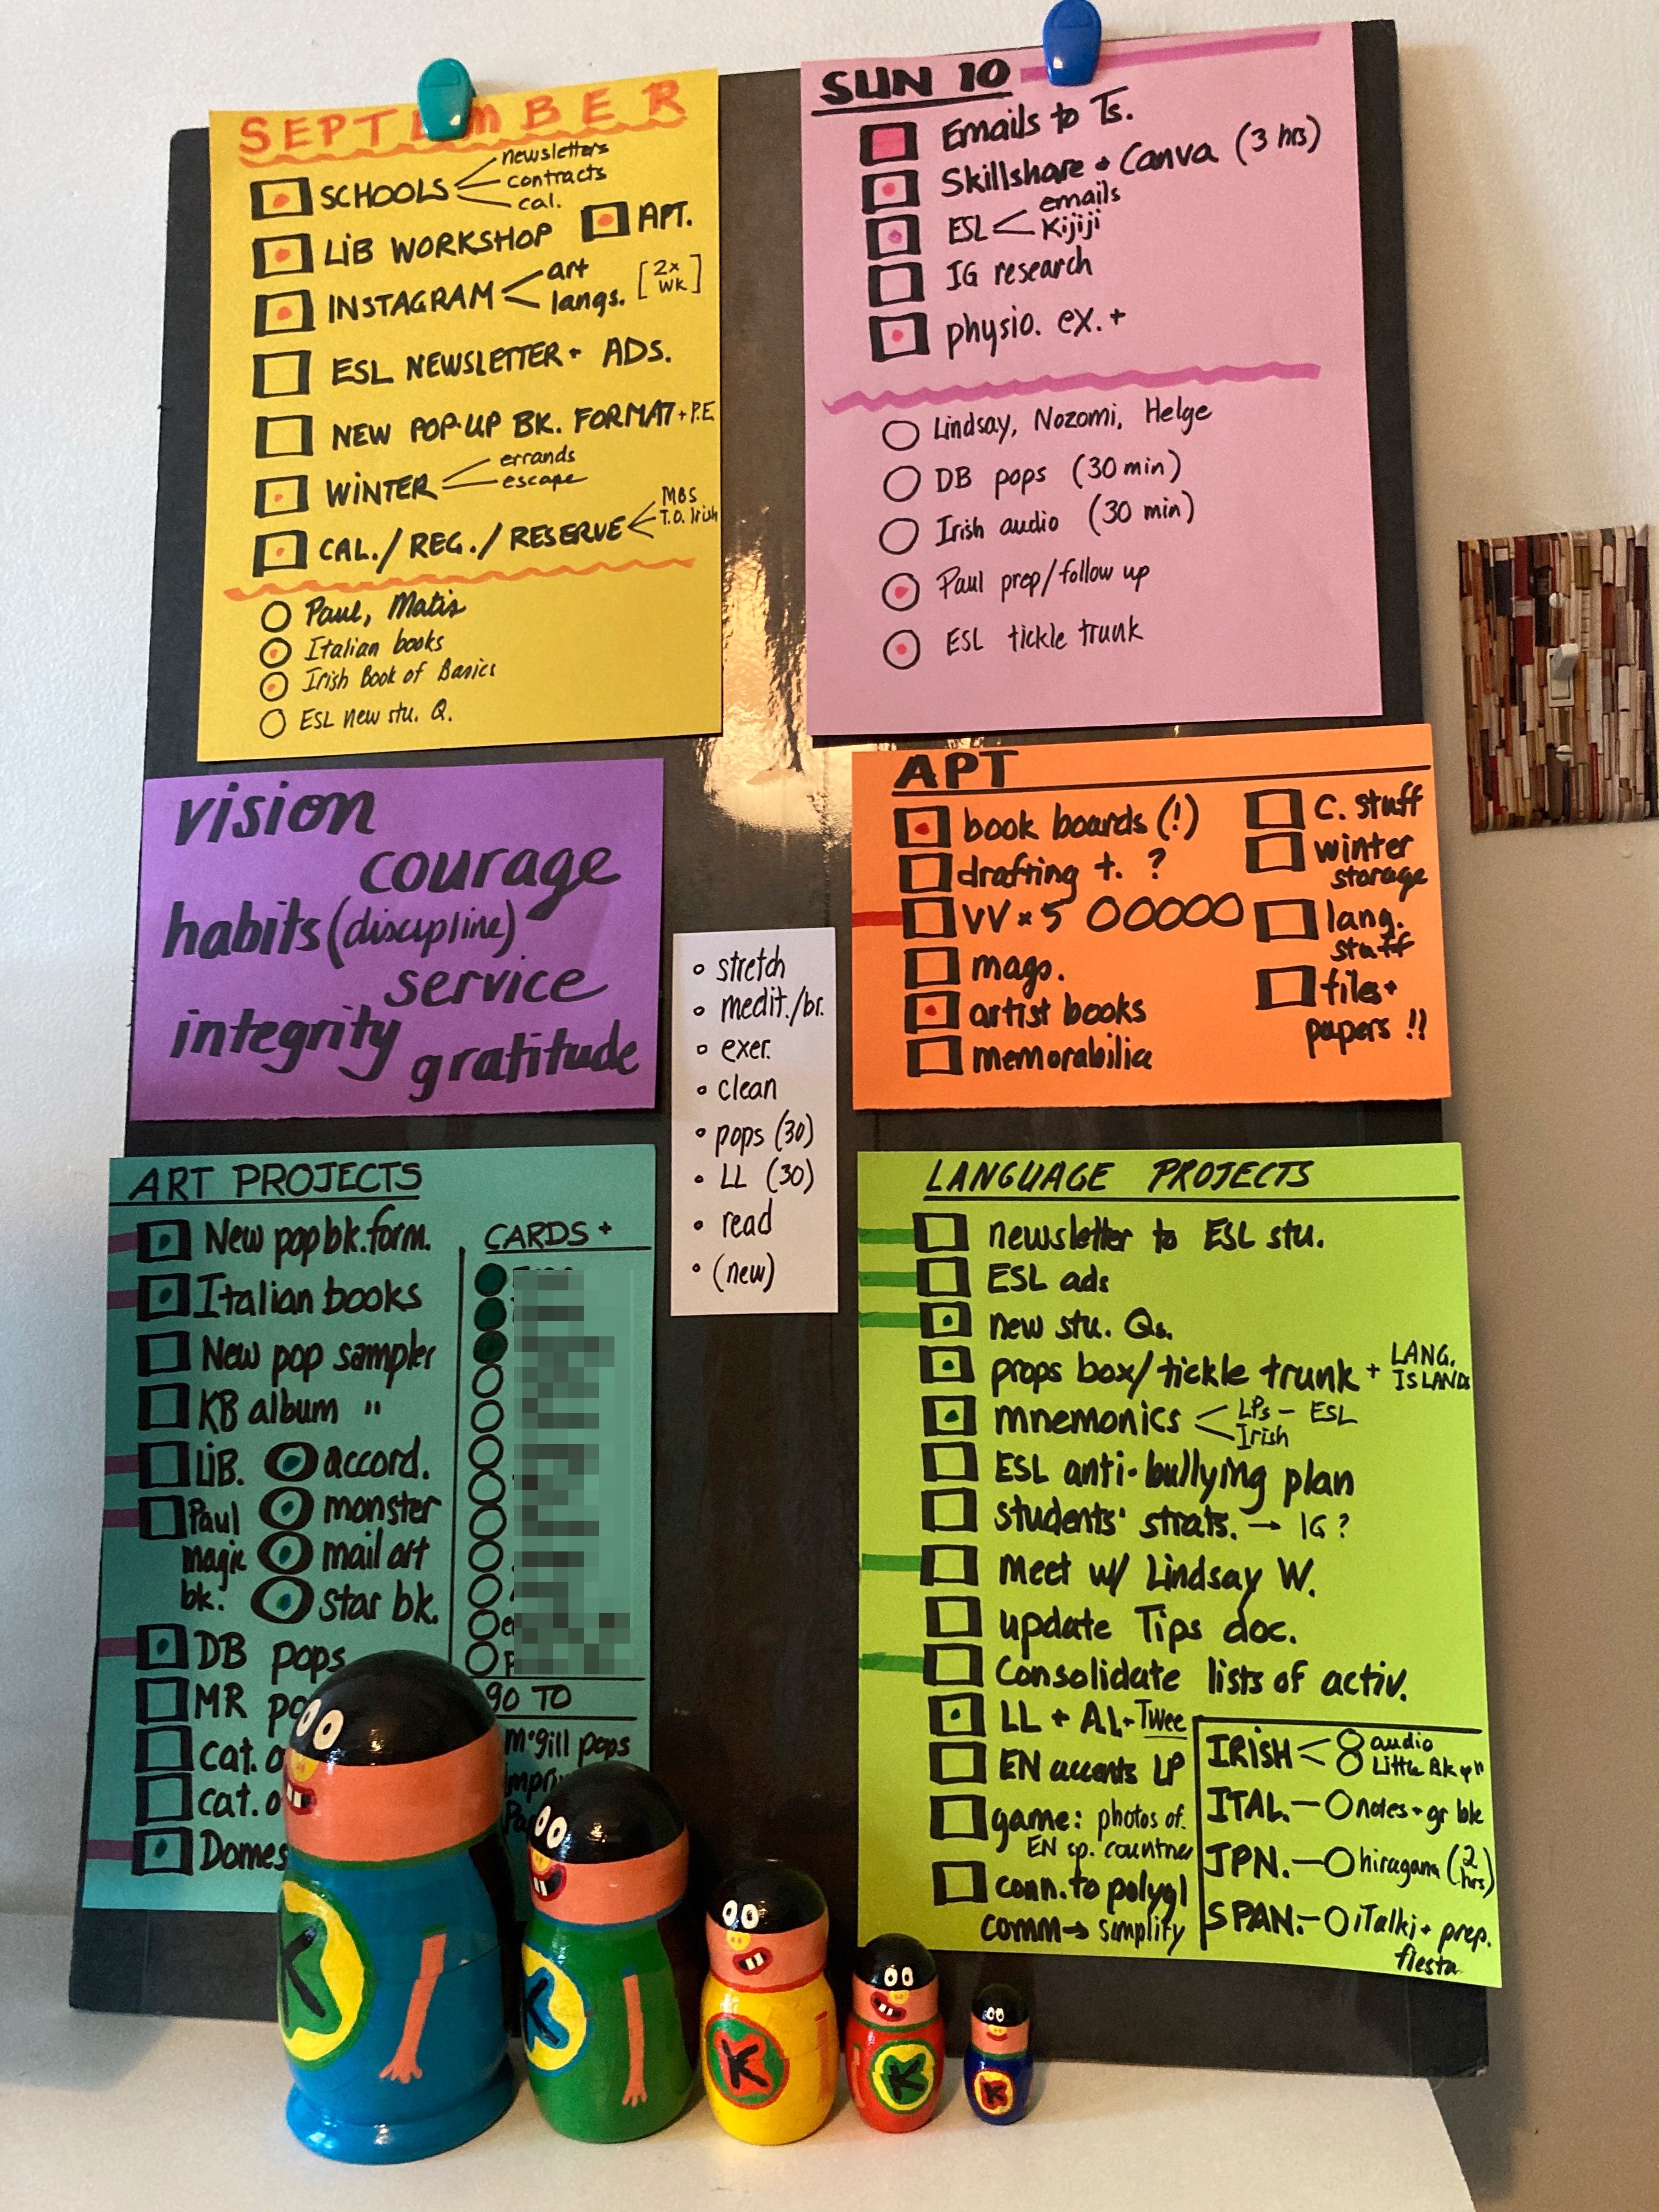 Coloured pieces of paper glued to a foam core backing. Each piece of paper has a different type of list with checkboxes next to each item.